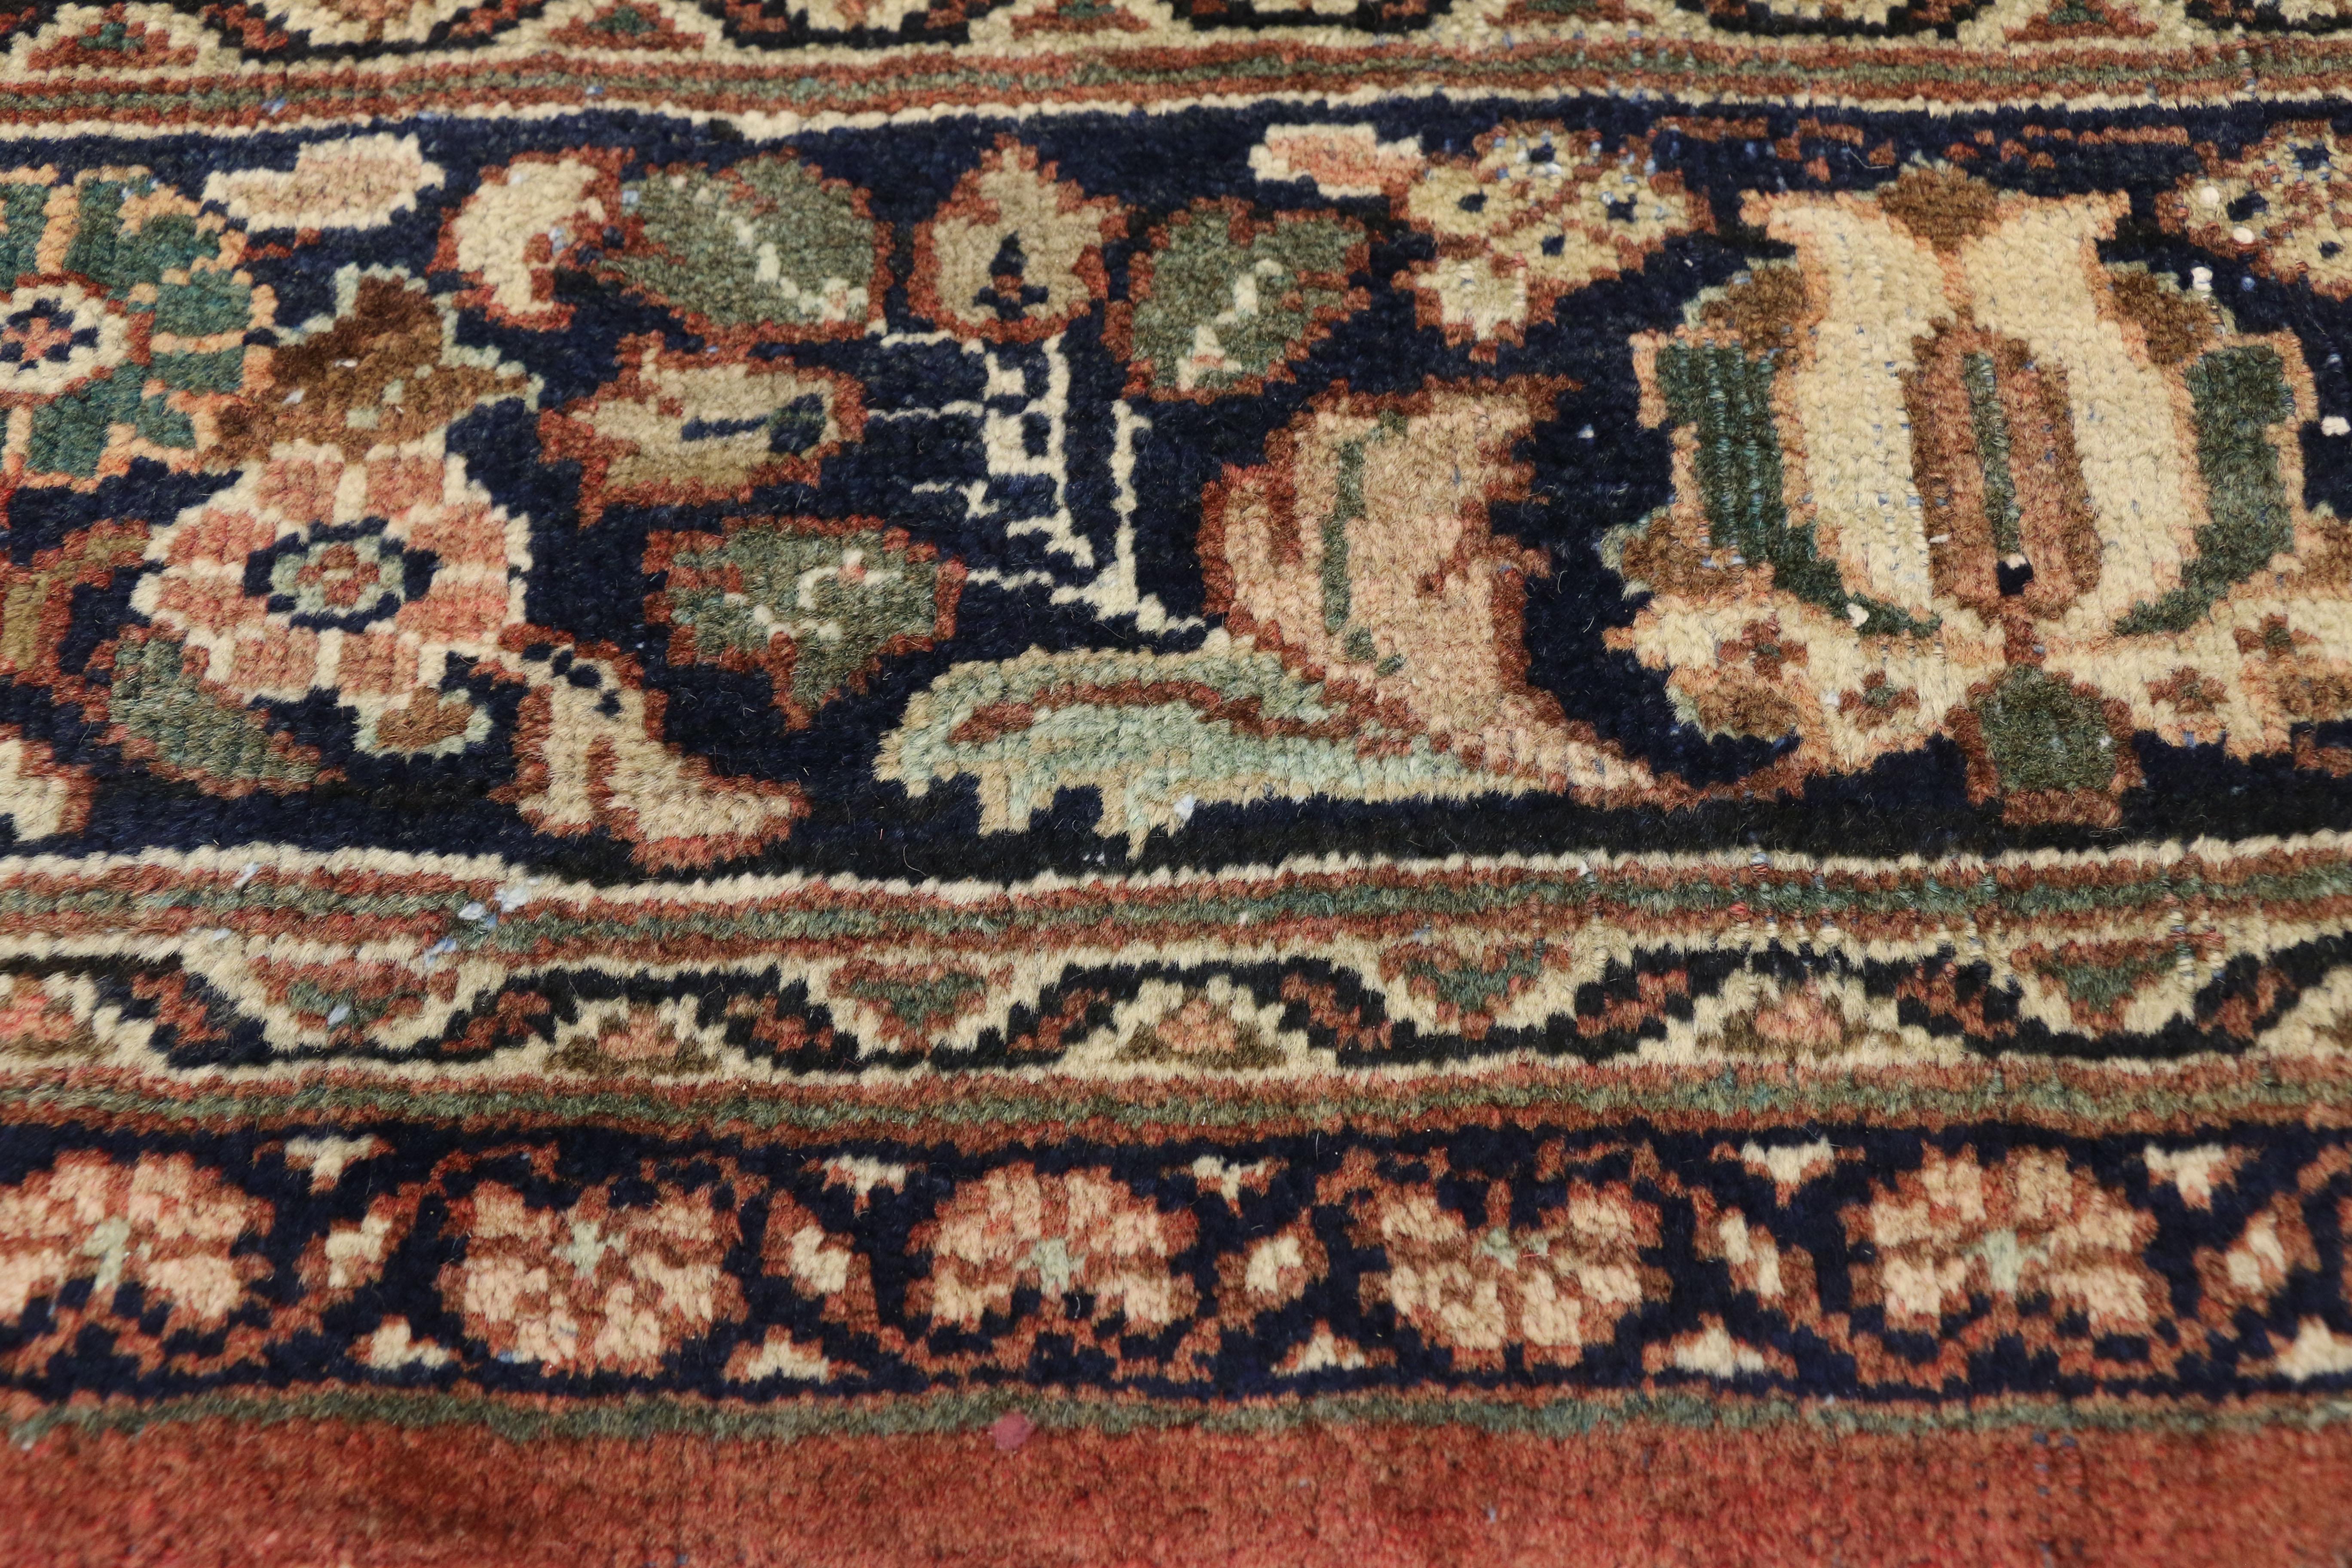 Antique Persian Mahal Rug with Rustic English Country Style In Good Condition For Sale In Dallas, TX